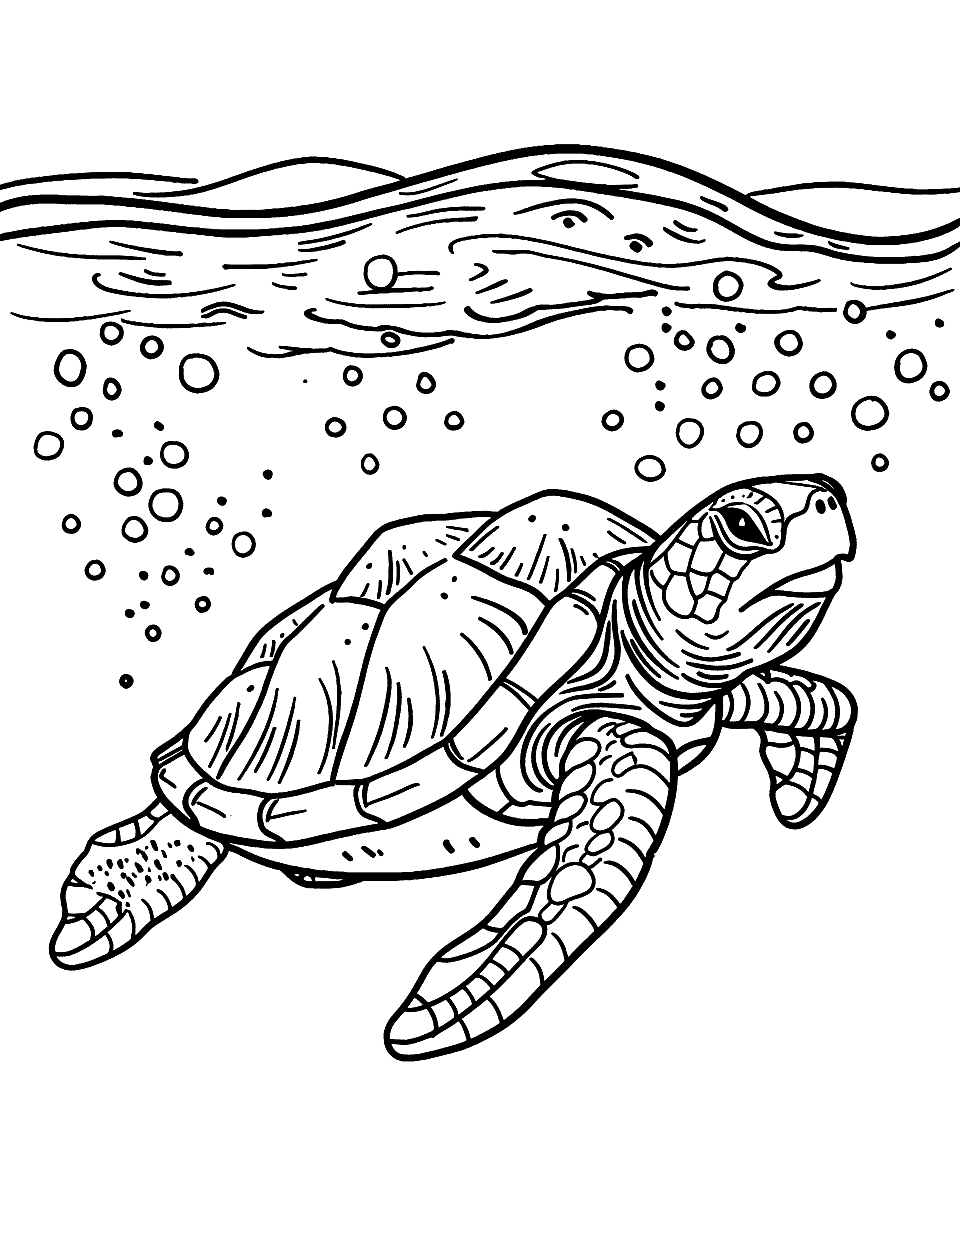 Turtle Swimming Toward the Surface Sea Creature Coloring Page - A sea turtle glides through the water toward the surface for a breath of fresh air.